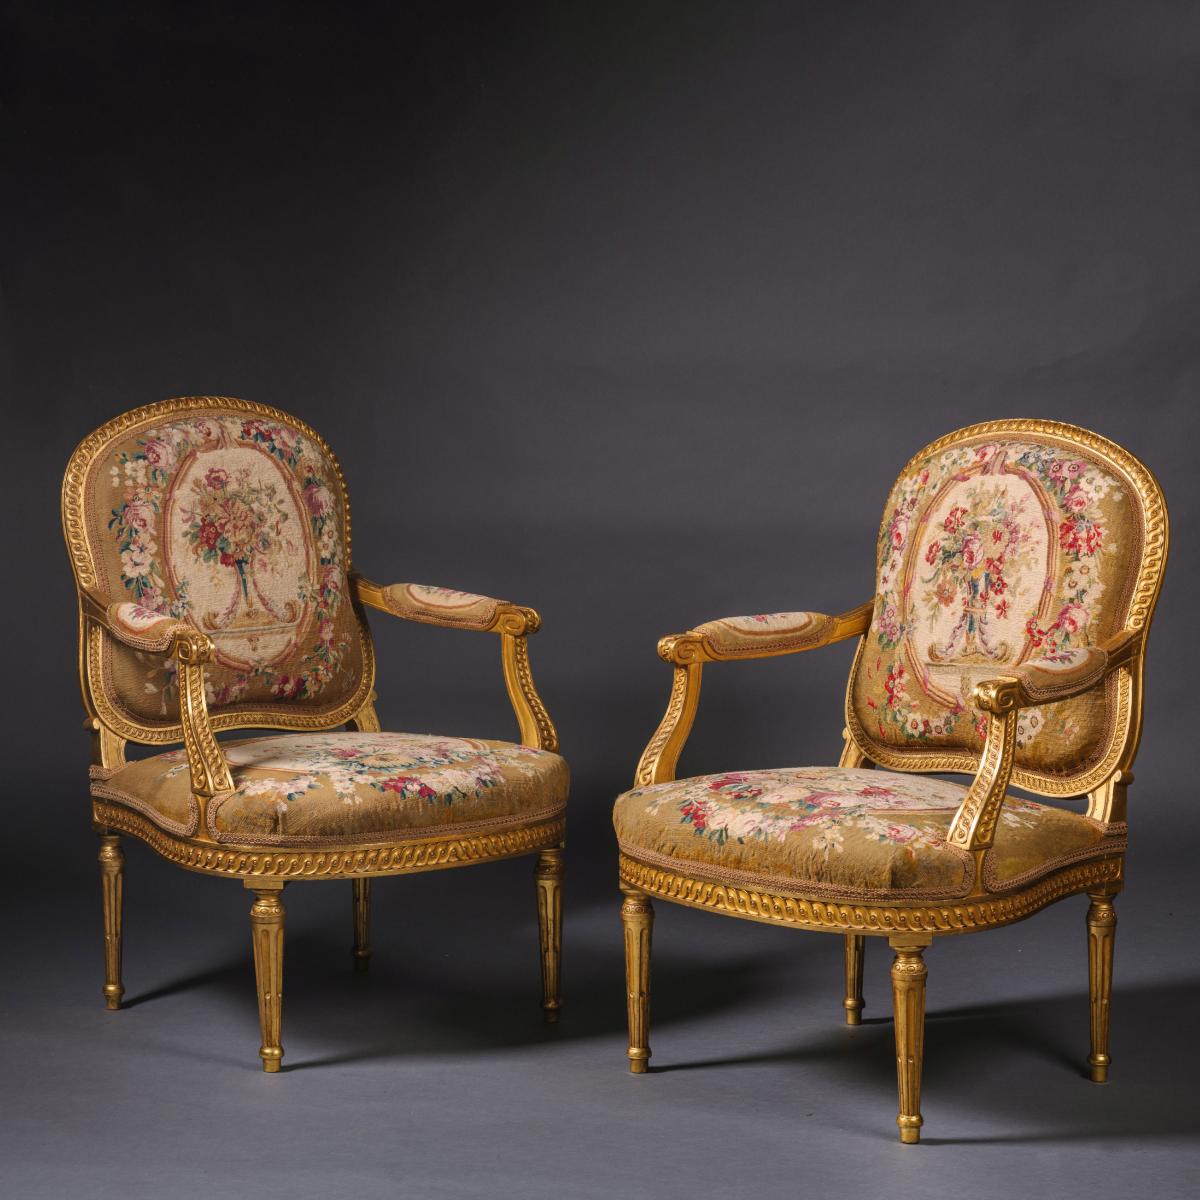 A Pair of Louis XIV Style Carved Giltwood Fauteuils, Circa 1840